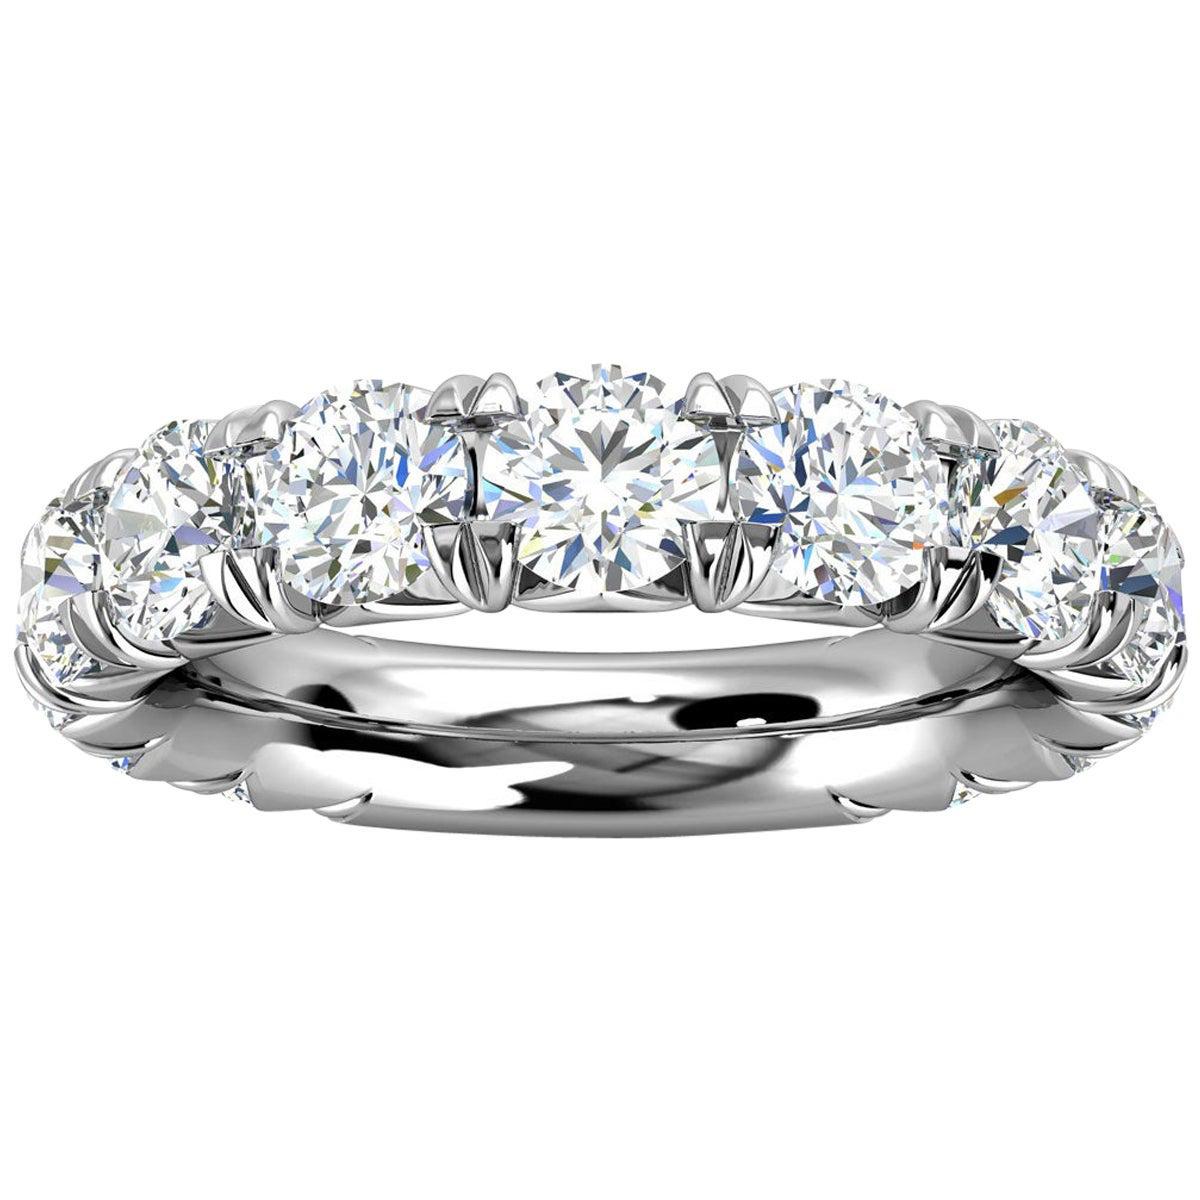 For Sale:  18k White Gold GIA French Pave Diamond Ring '3 Ct. Tw'